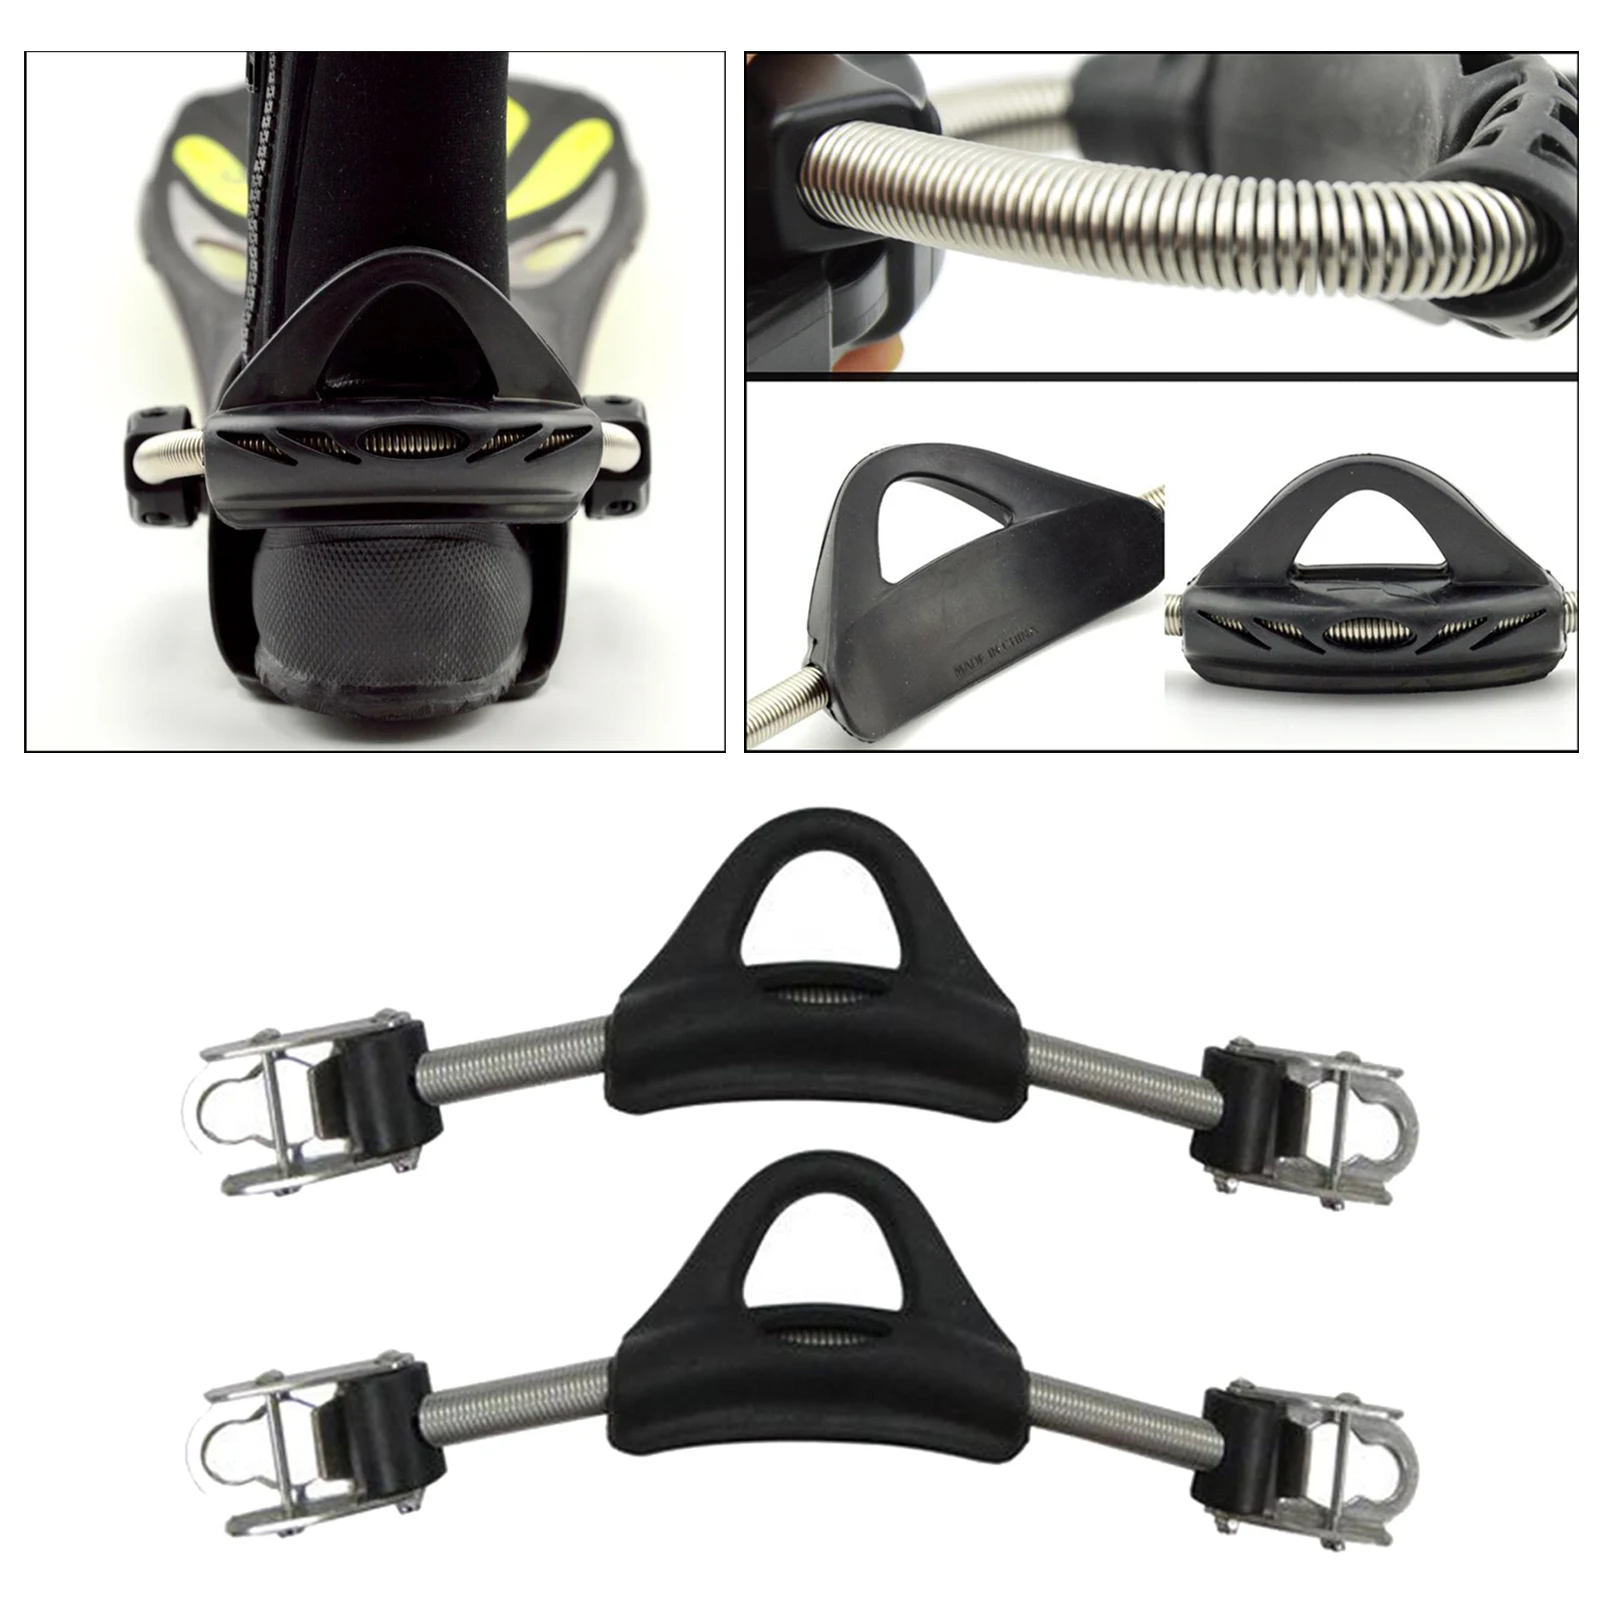 Spring Fin Strap Stainless Steel Buckles For Open Heel Dive Scuba Flippers 2PCs 